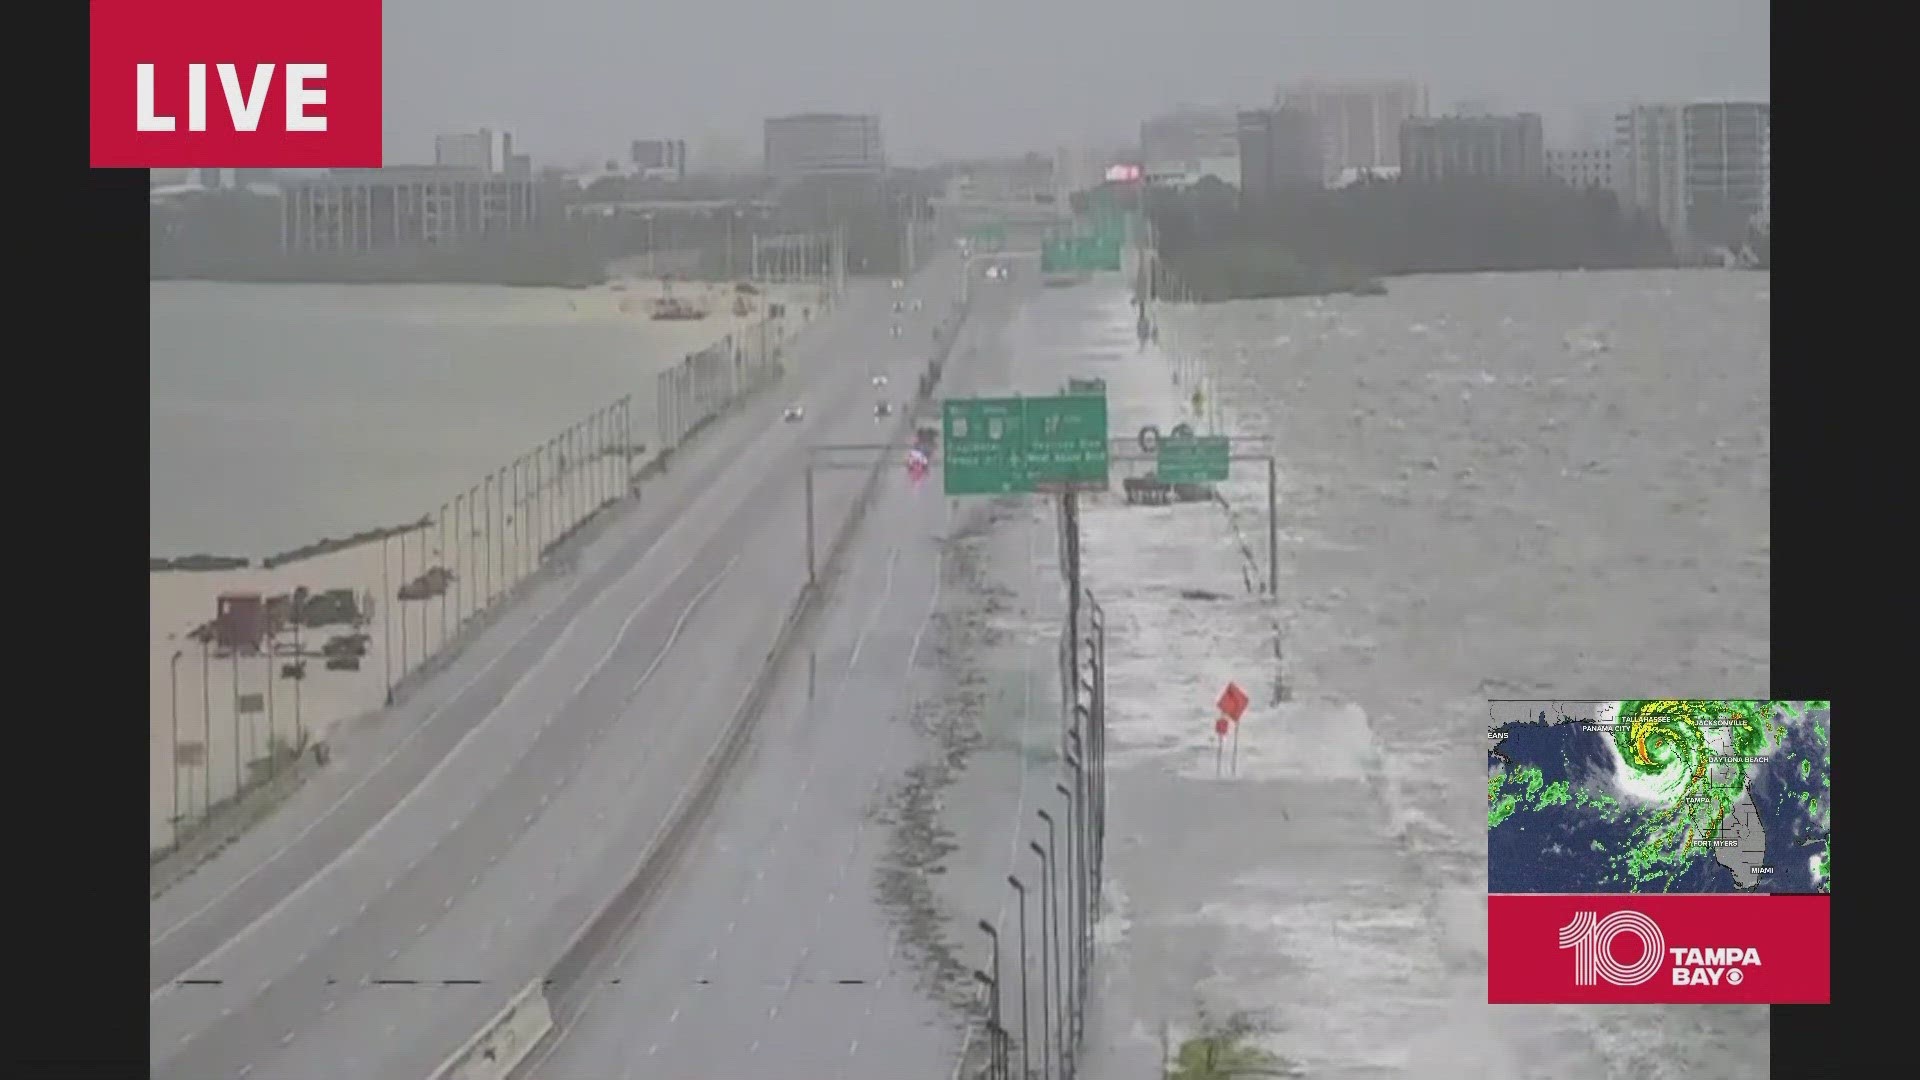 Bridges, causeways, and other routes are closed as water fills roads throughout the Tampa Bay area.